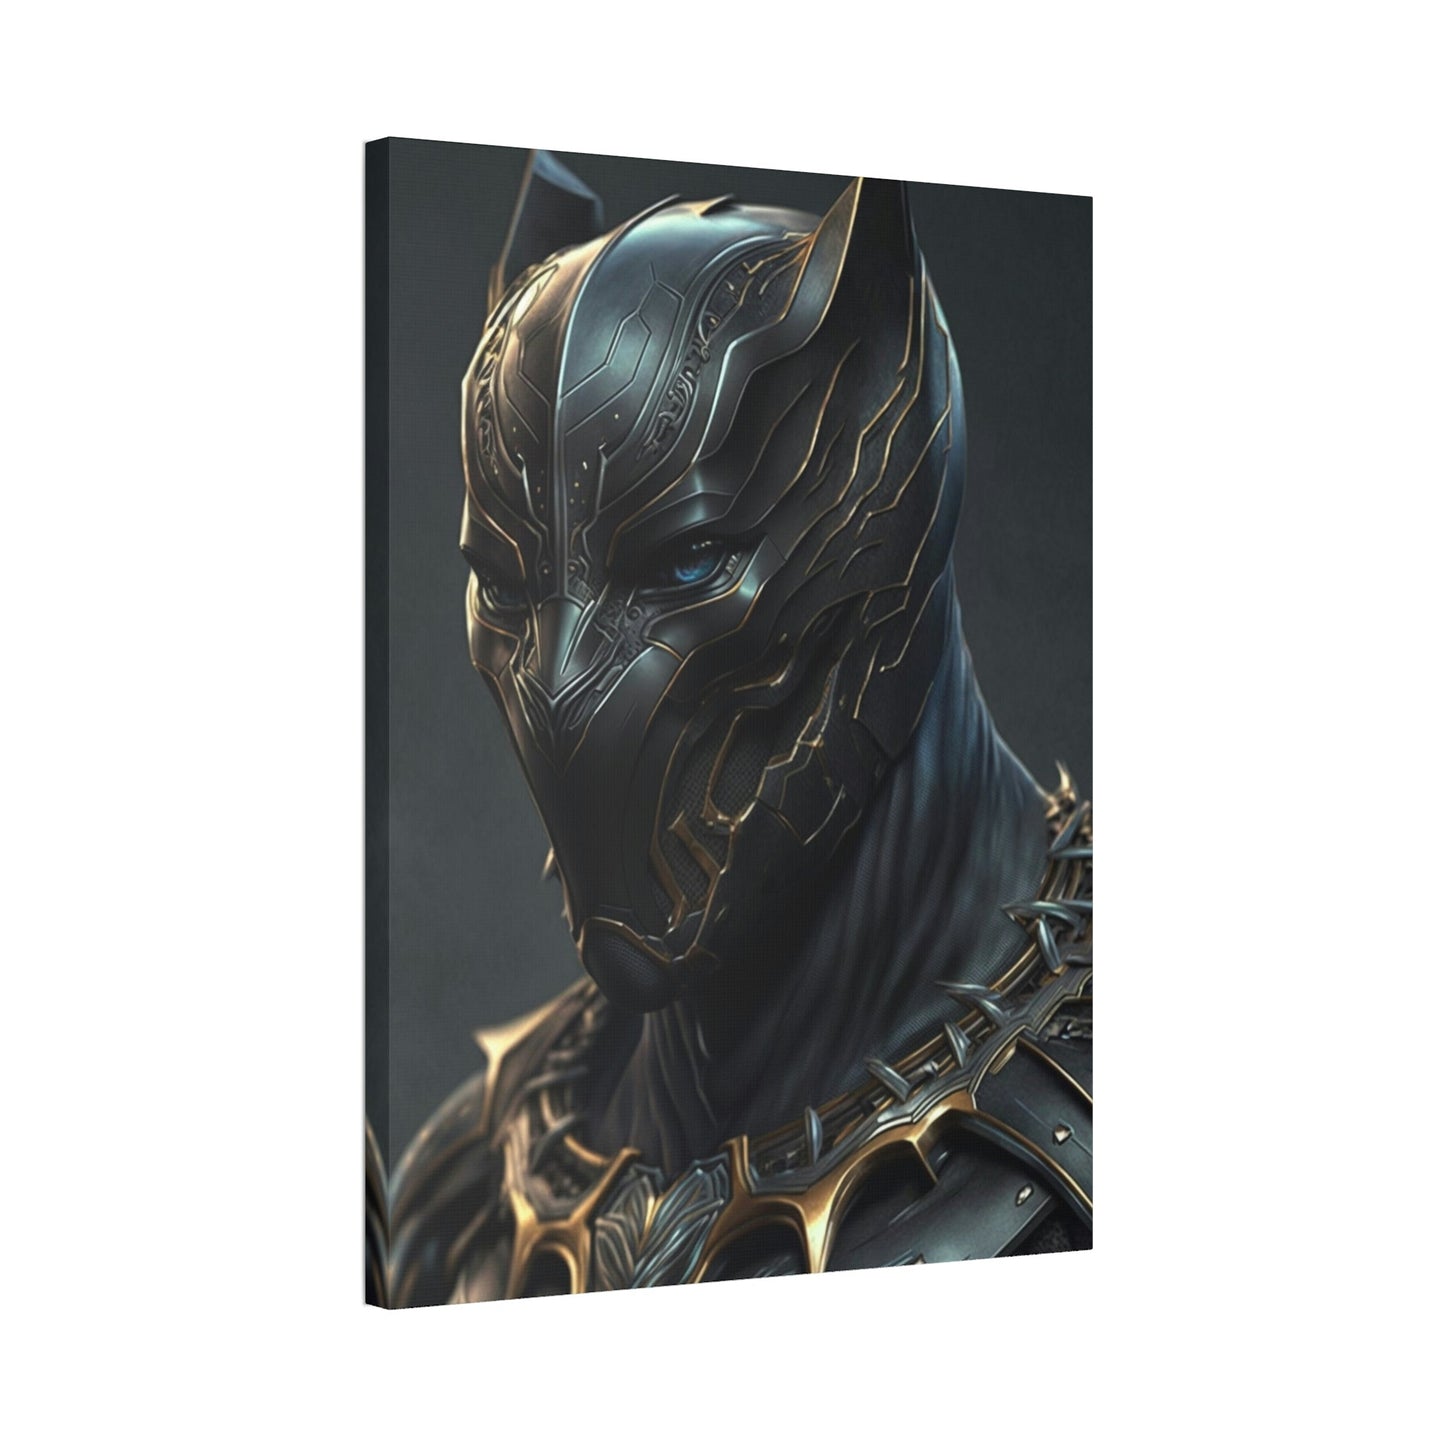 Panther Power: Poster and Print on Canvas with Dynamic Black Panther Art